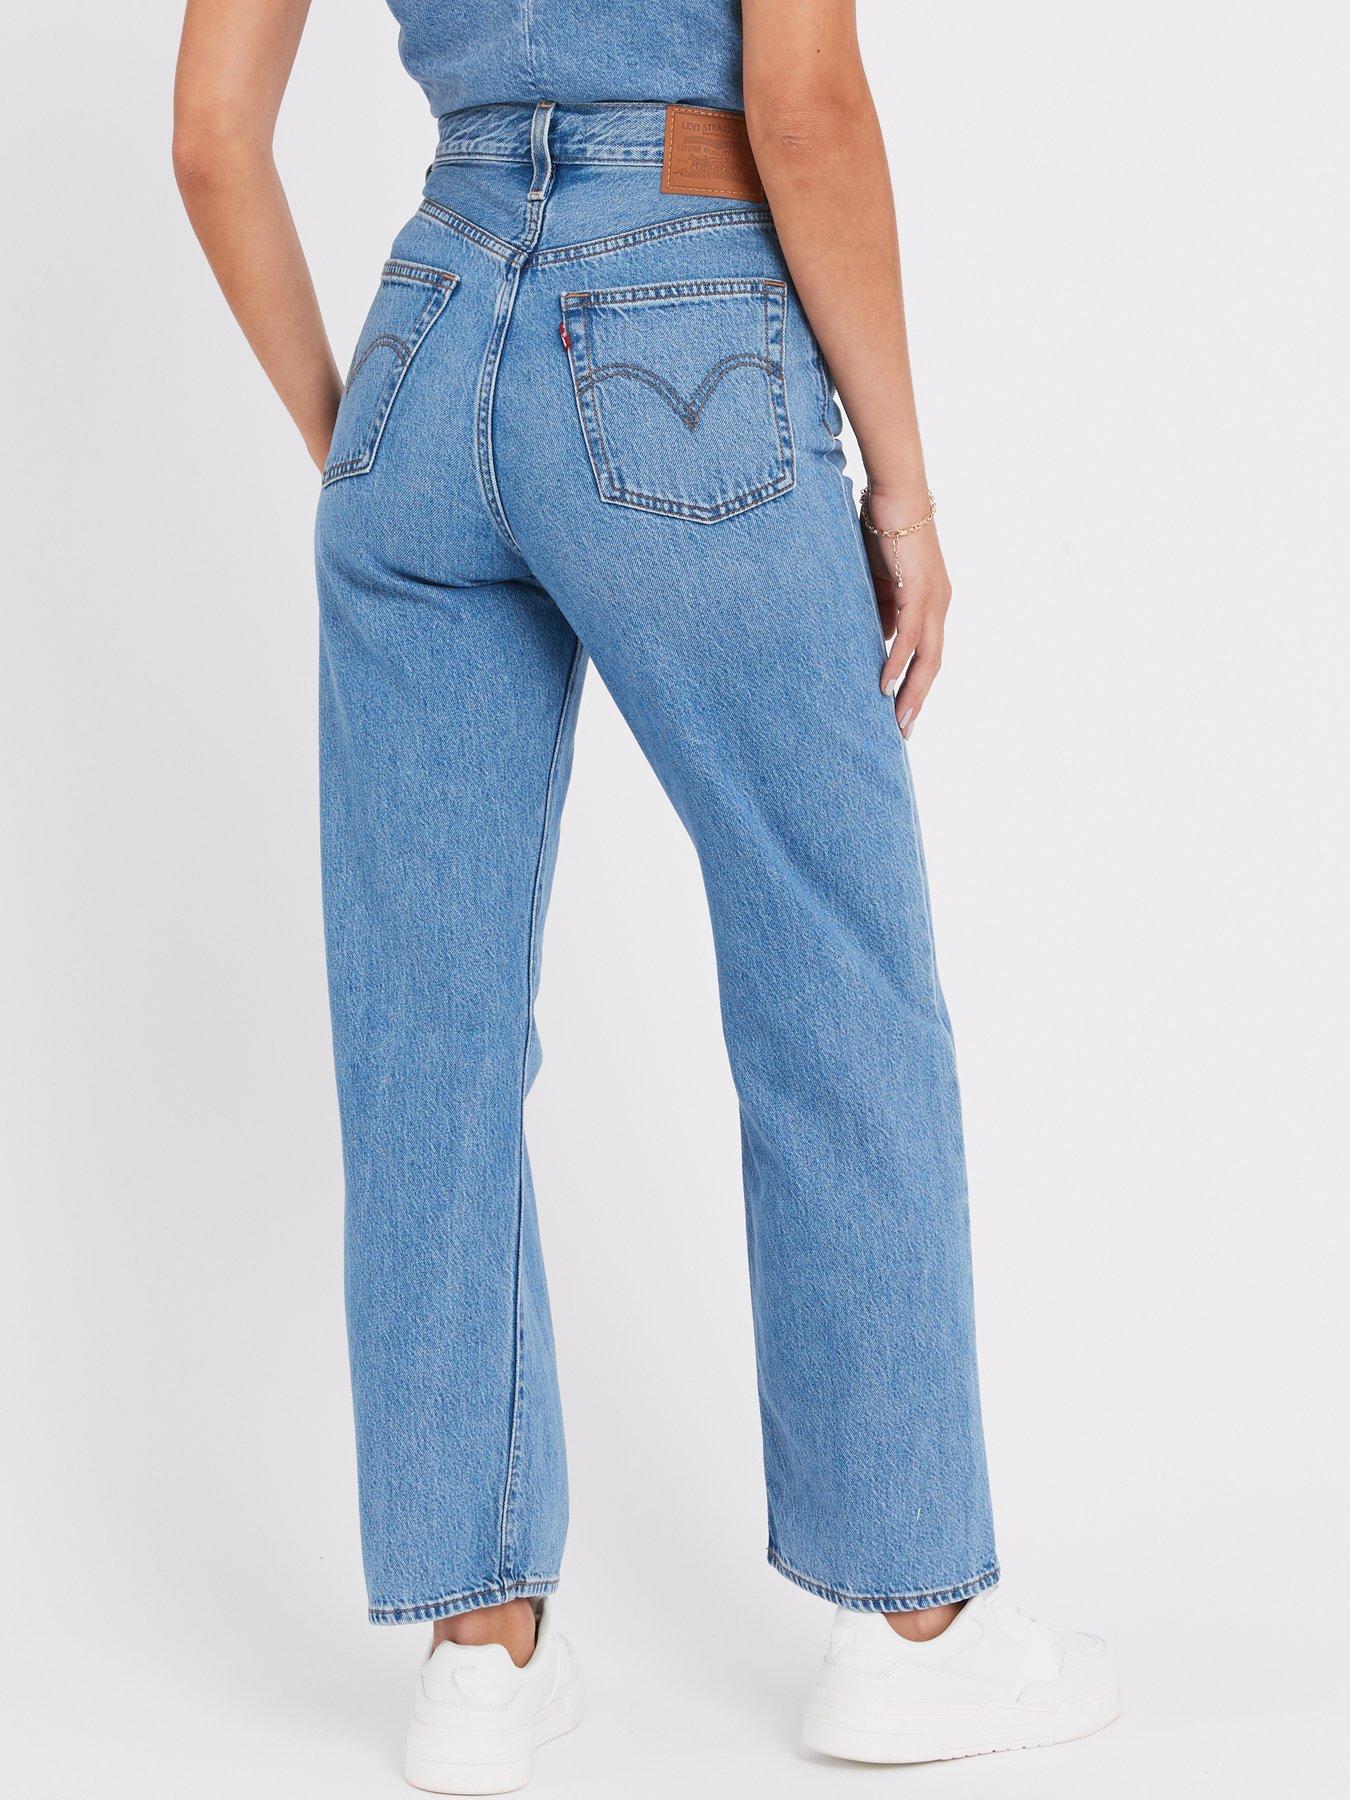 Levi's Ribcage Straight Leg Ankle Jean - Worn In